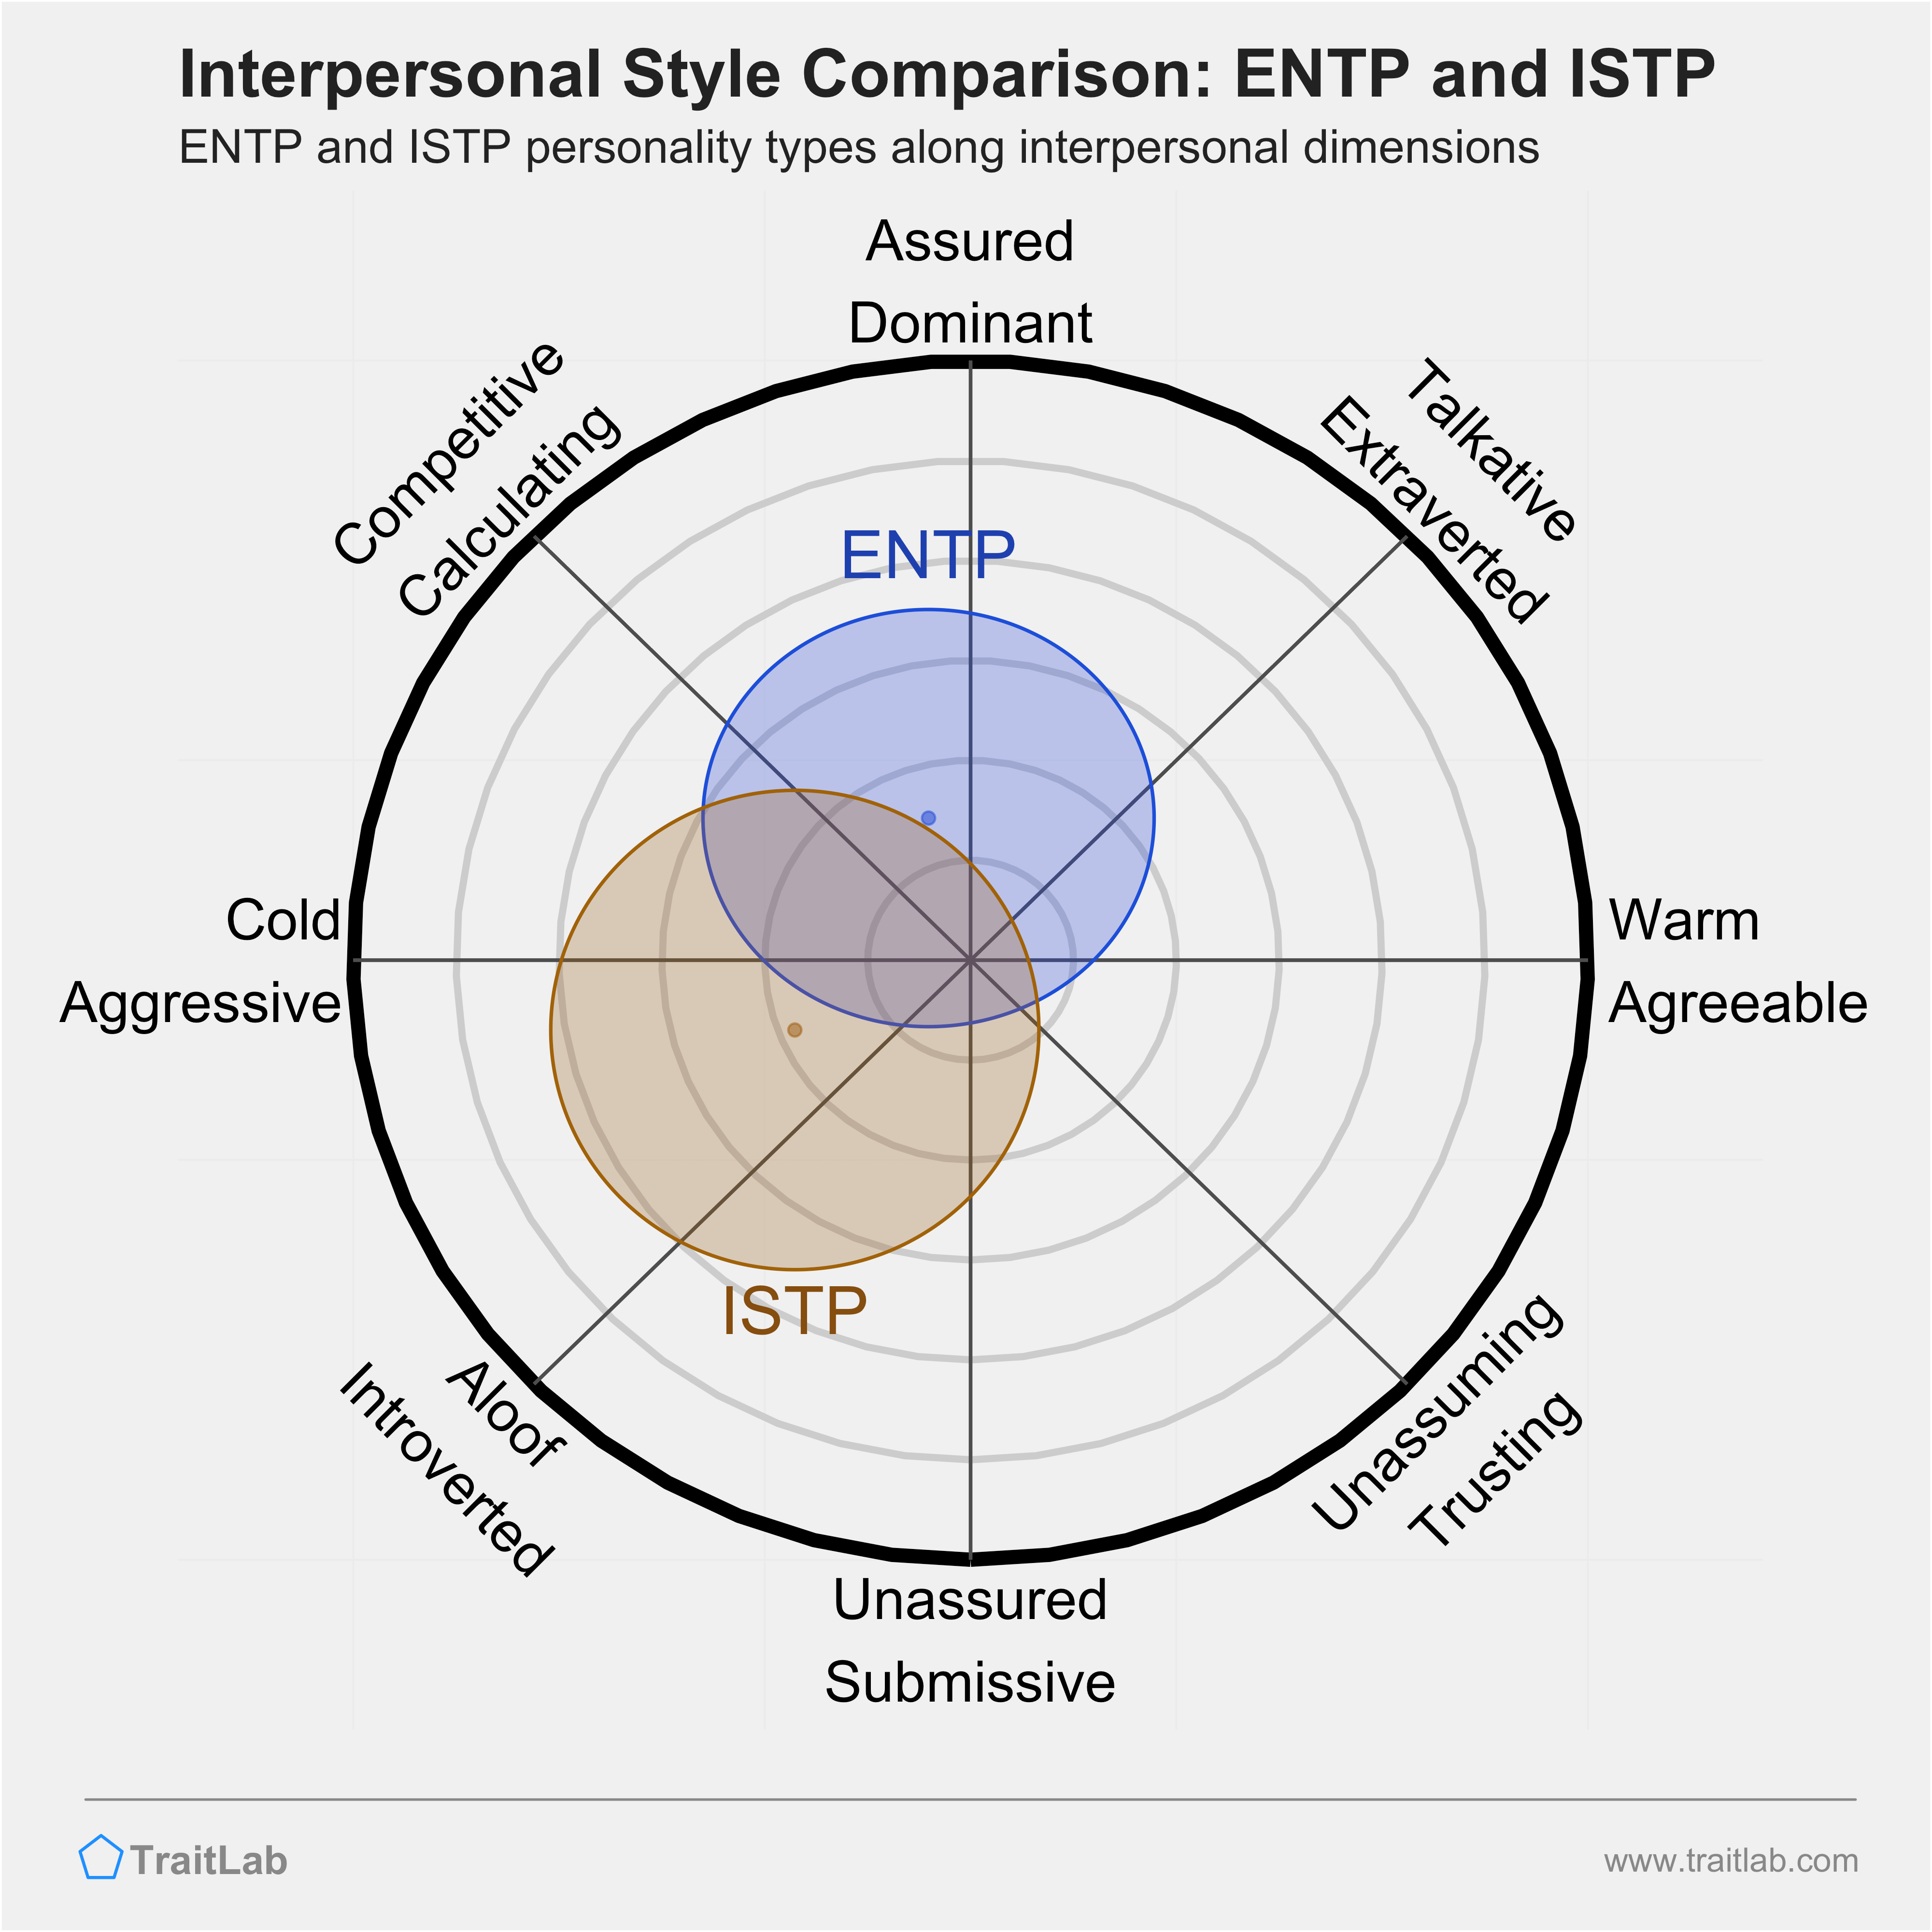 ENTP and ISTP comparison across interpersonal dimensions